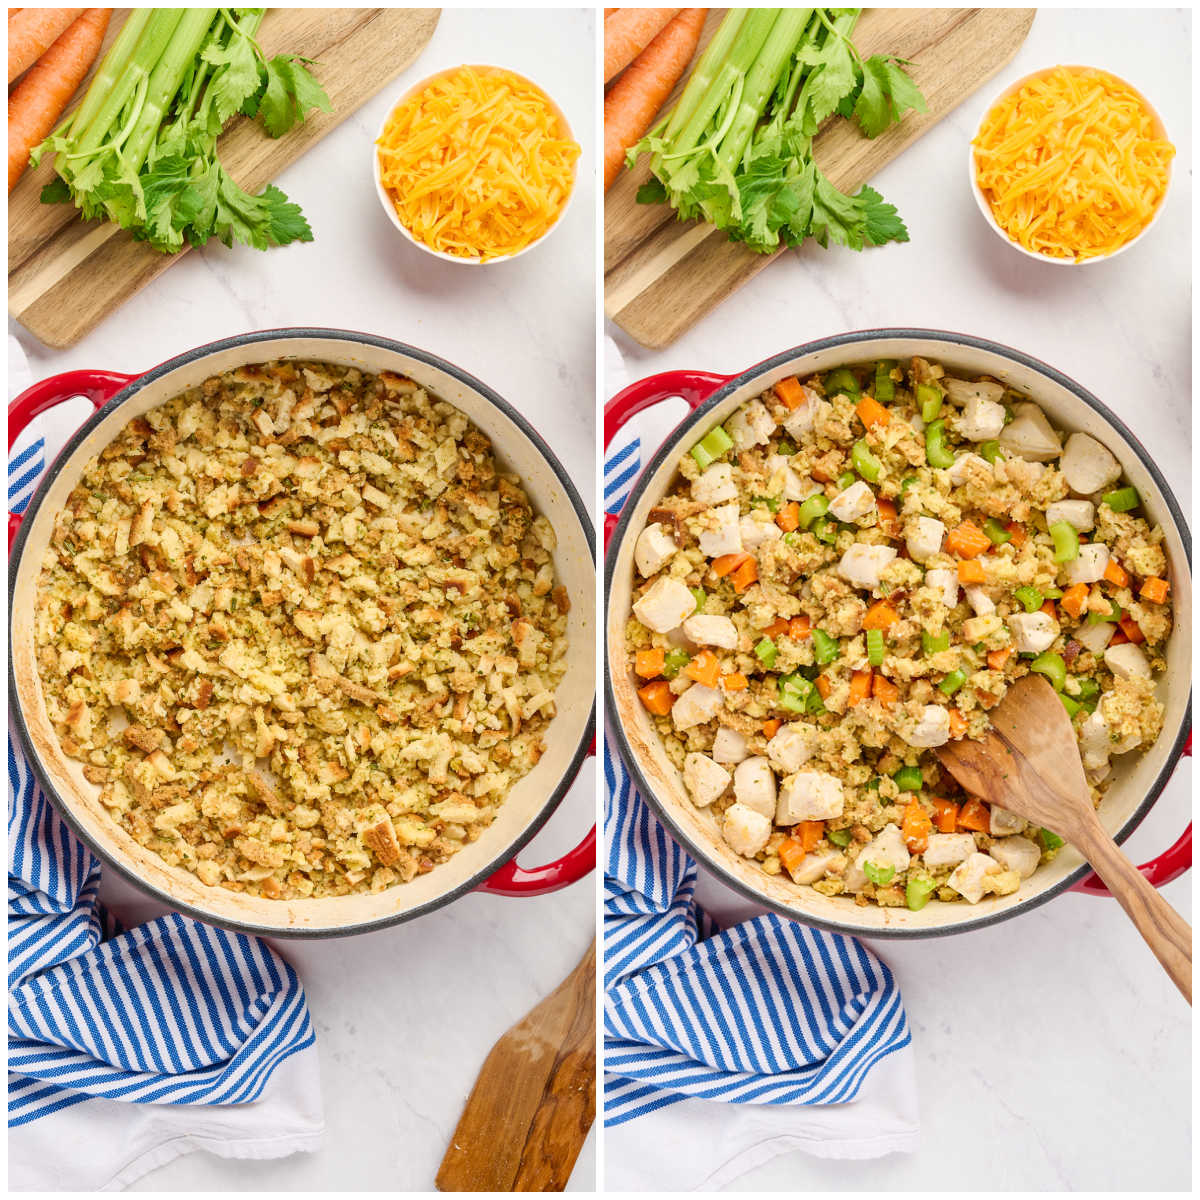 Steps to make one-pot chicken and stuffing.